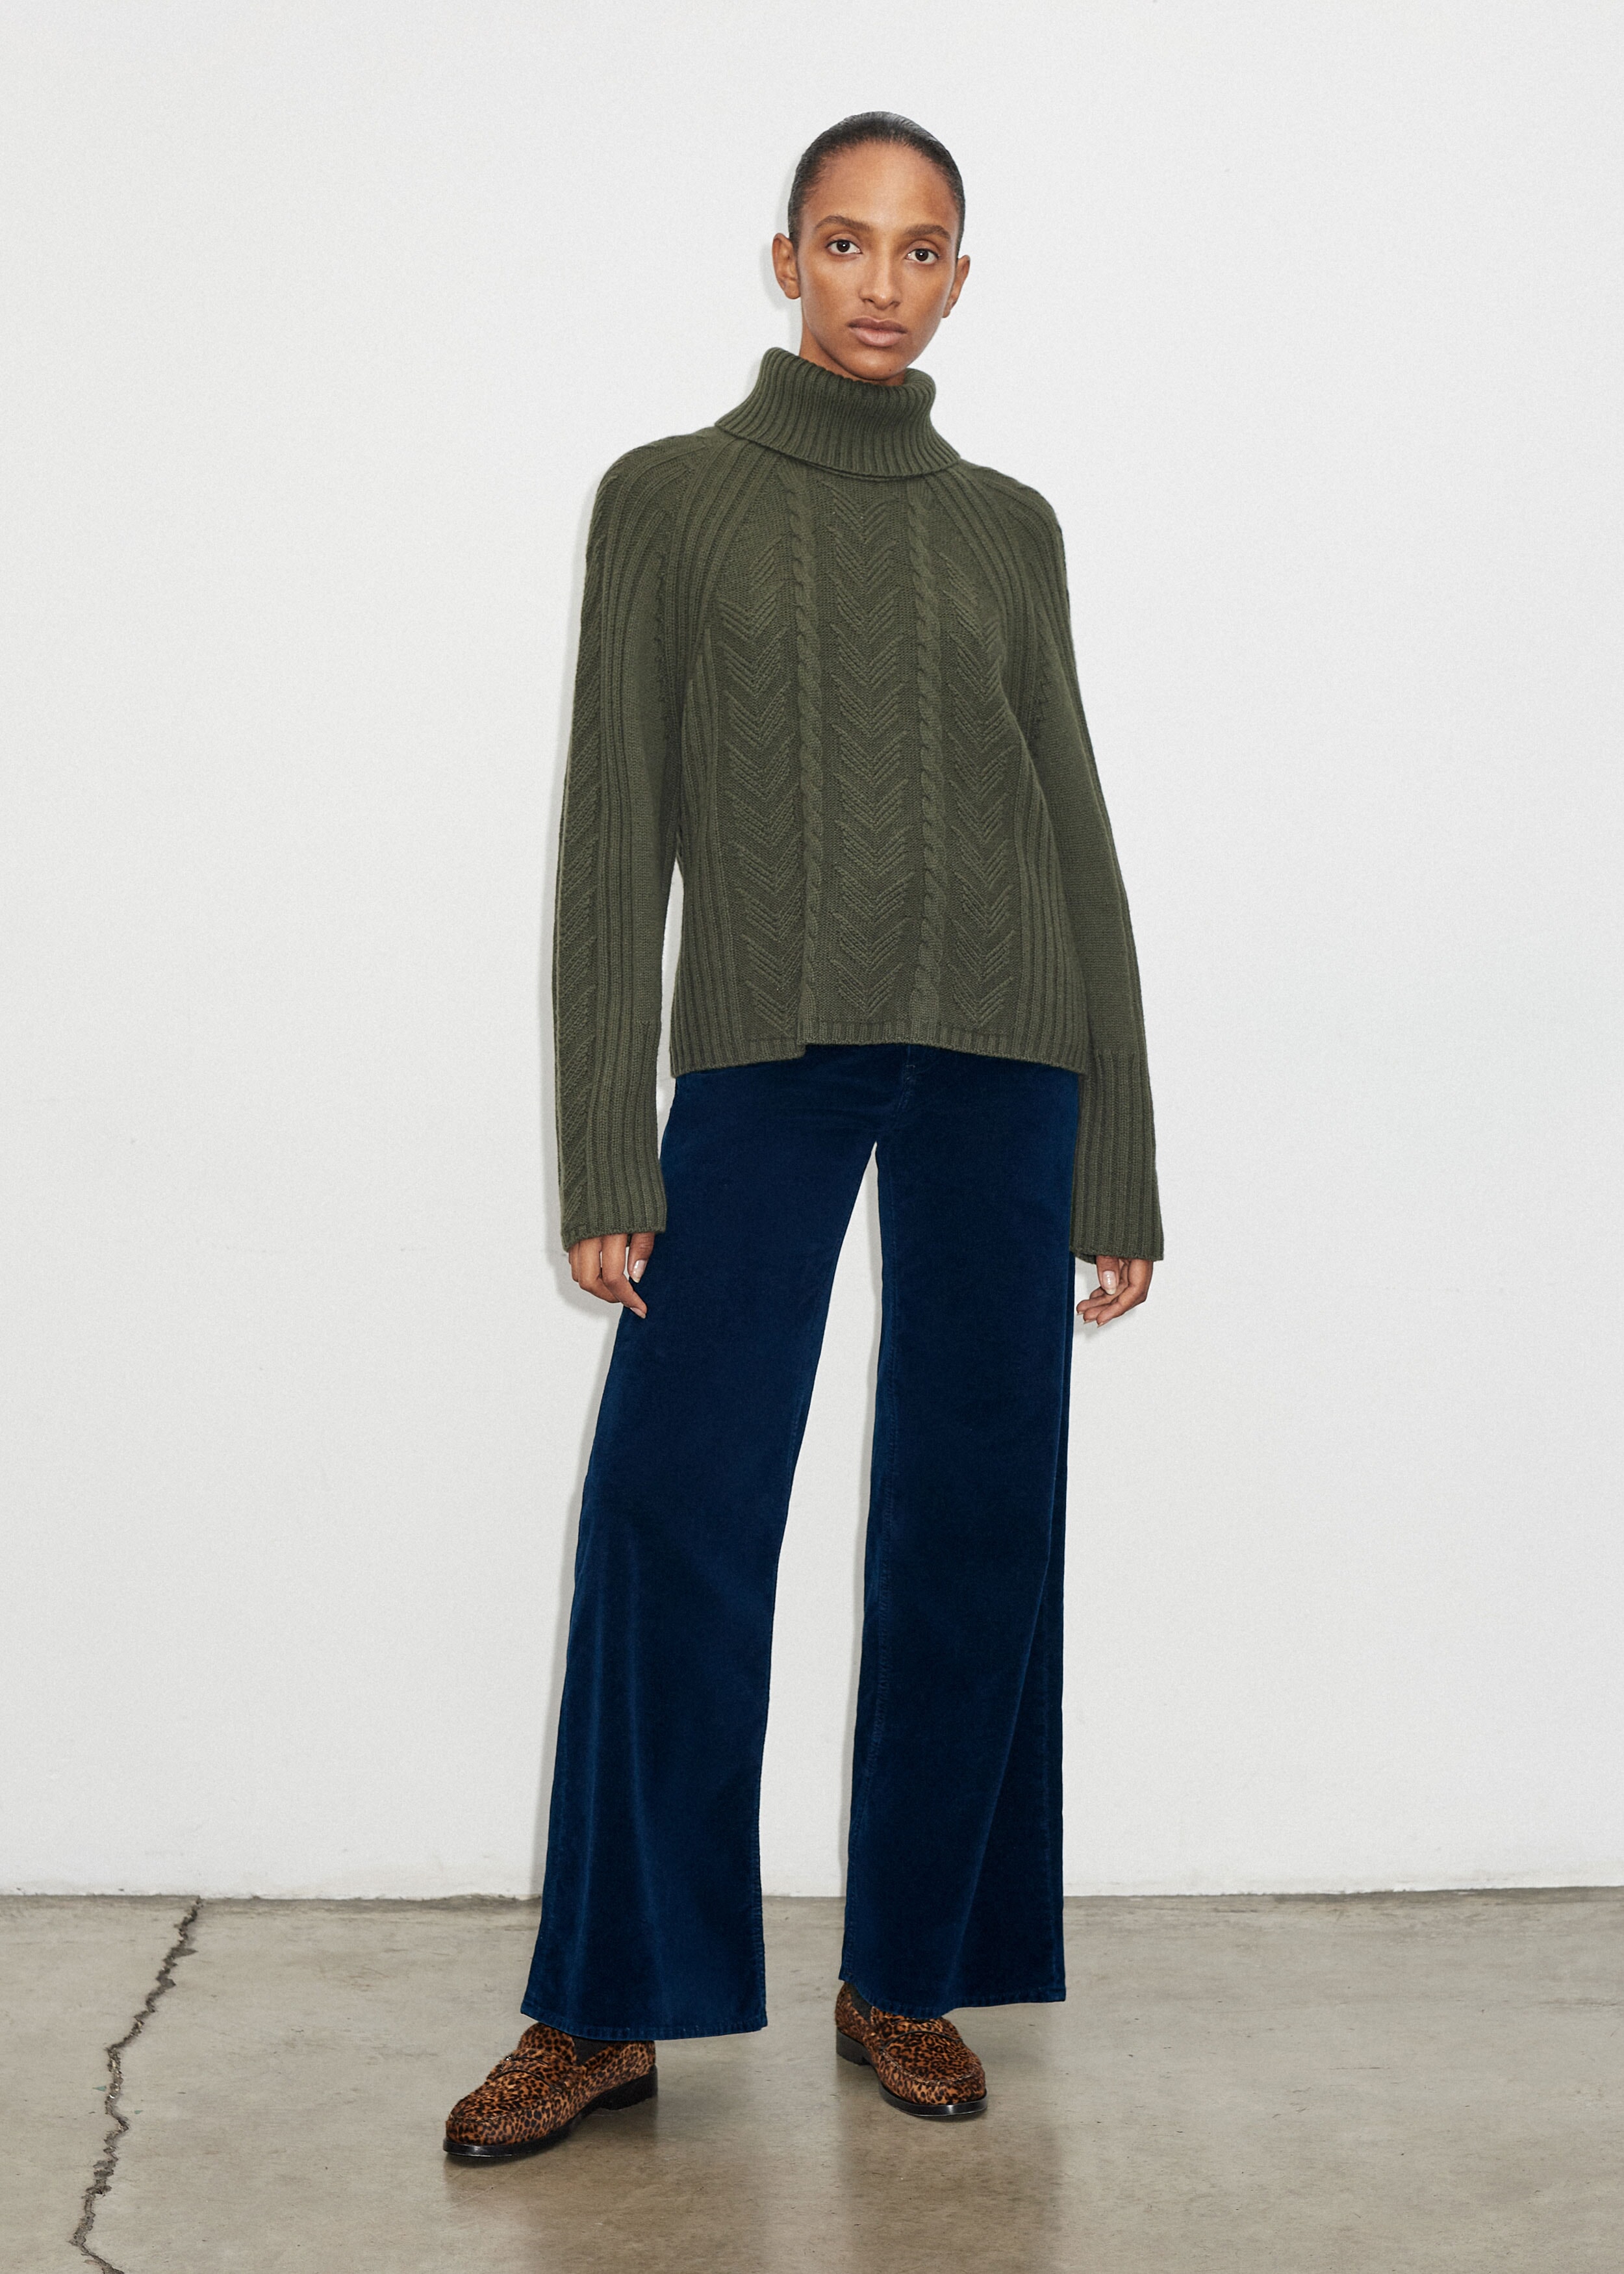 Merino Cashmere Relaxed Cable Knit Sweater + Snood Military Olive